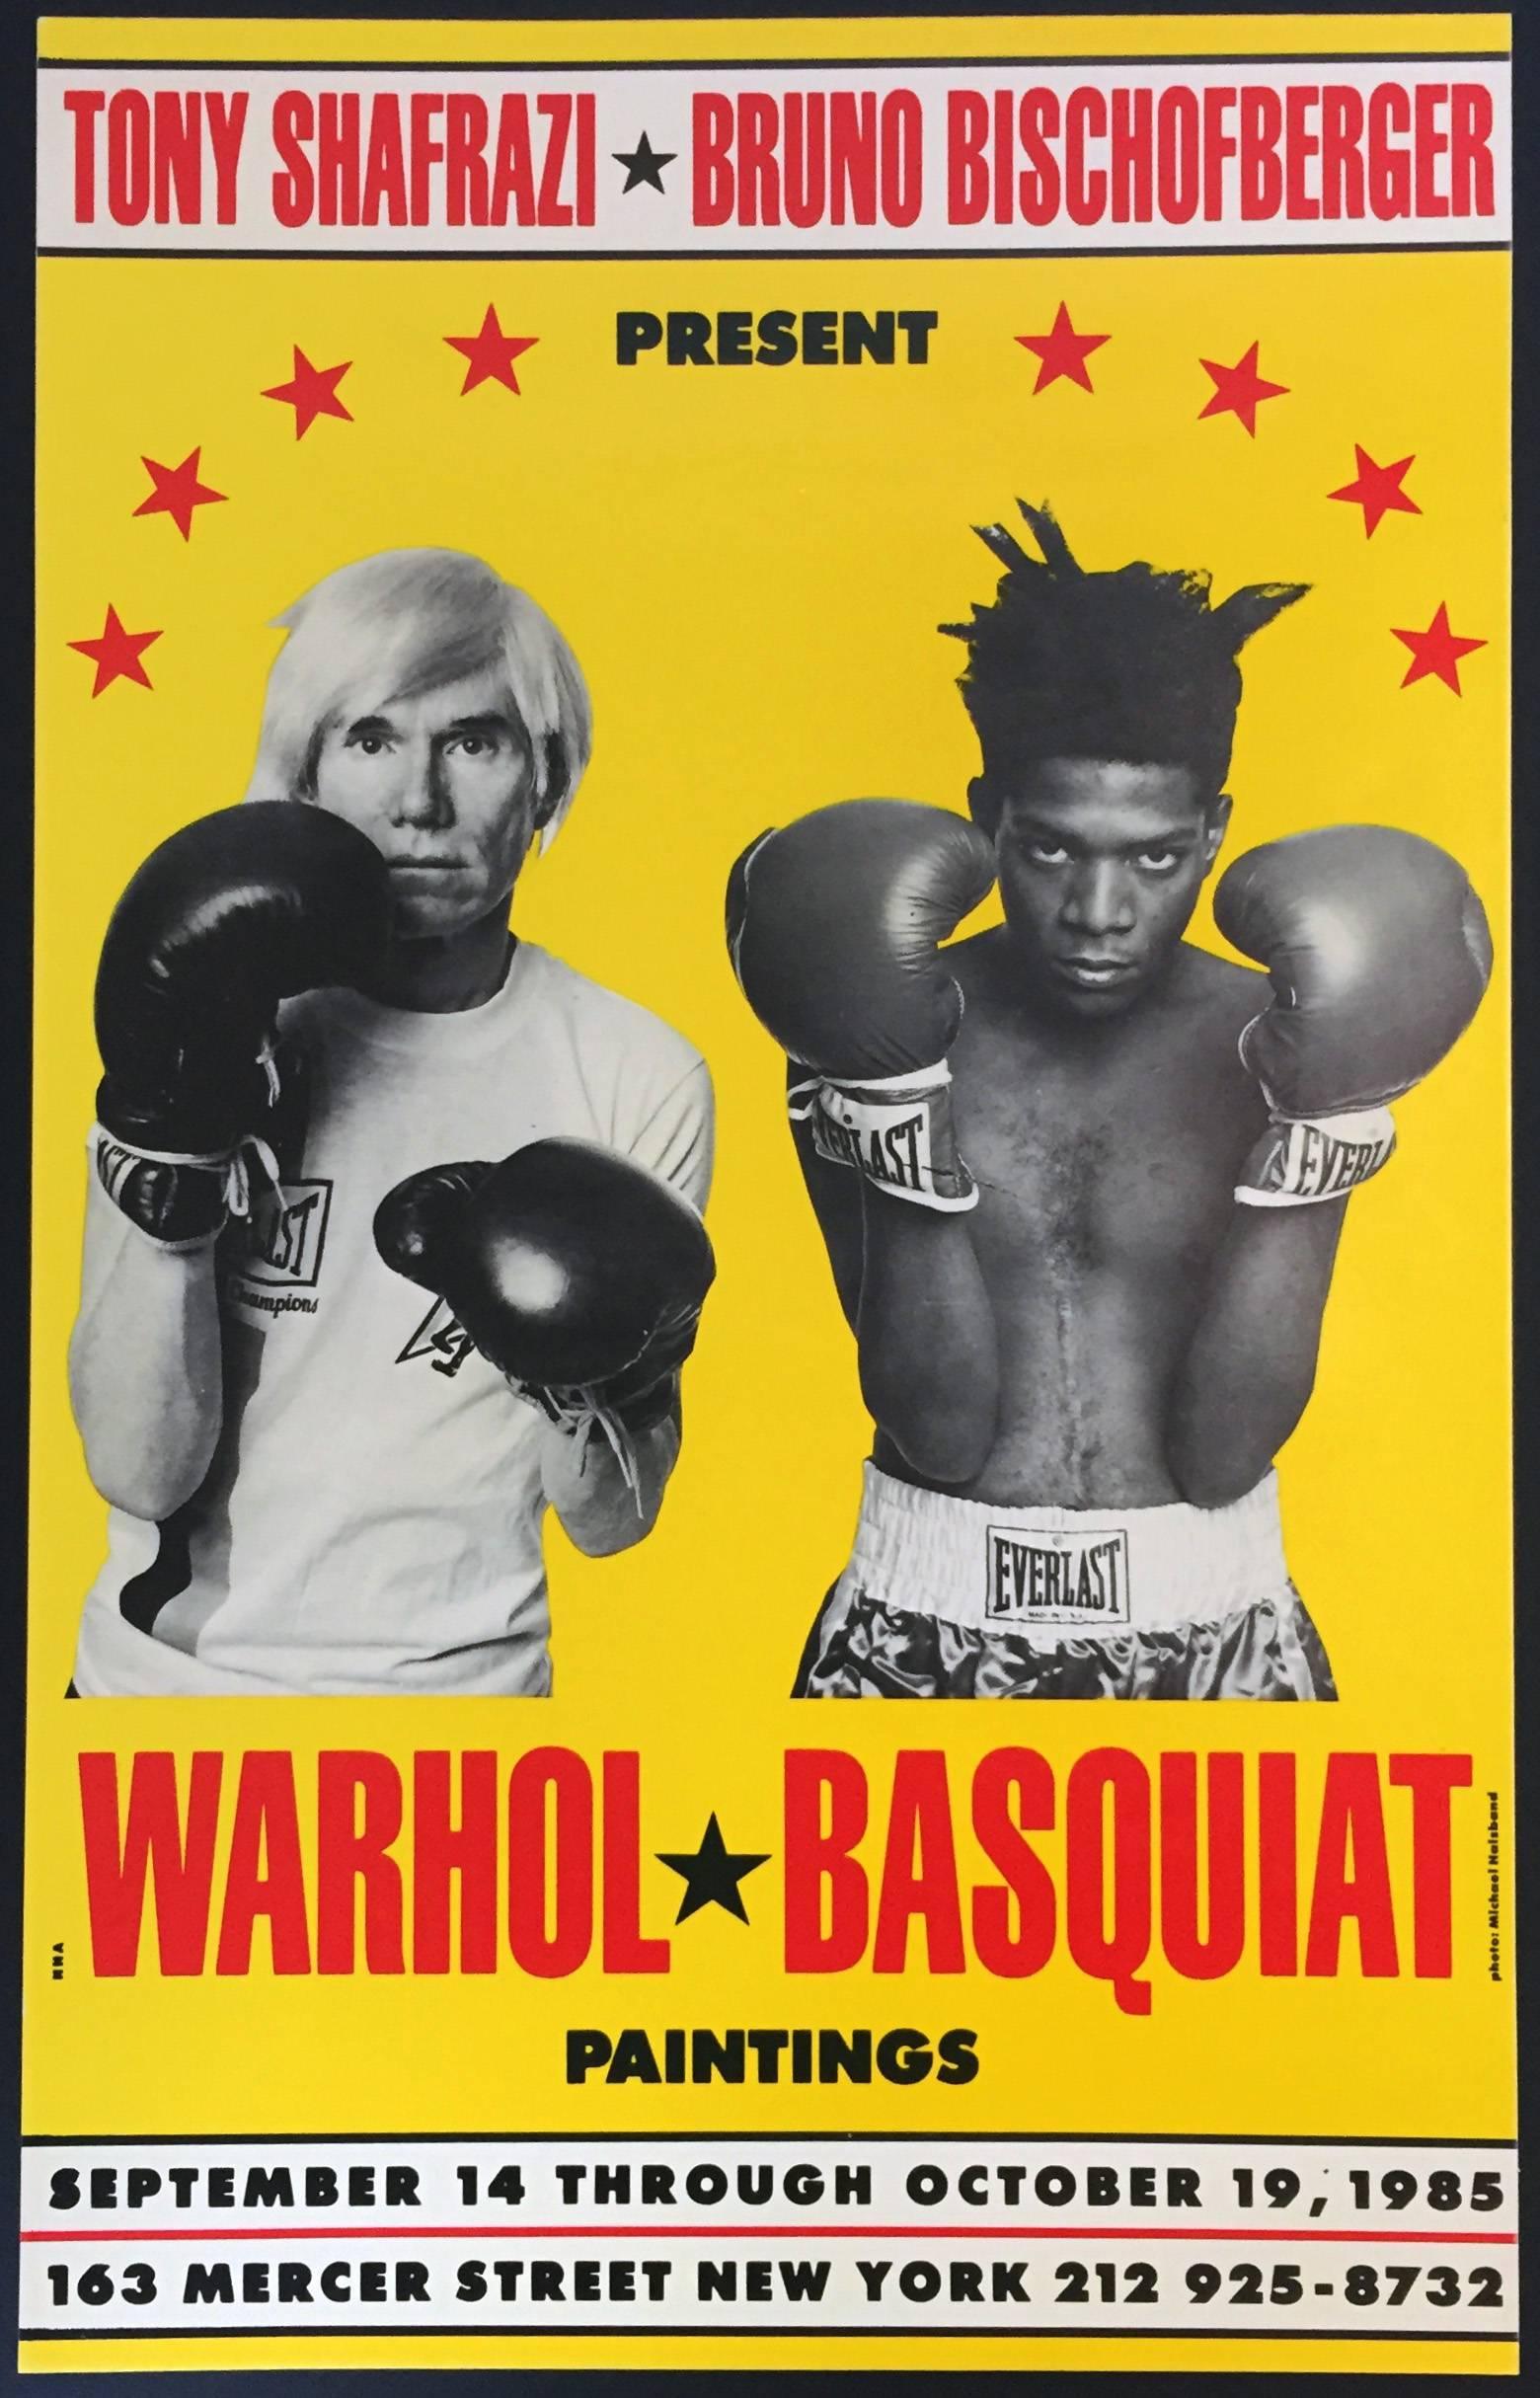 Jean-Michel Basquiat & Andy Warhol 'Paintings' Exhibit Poster - Print by Michael Halsband